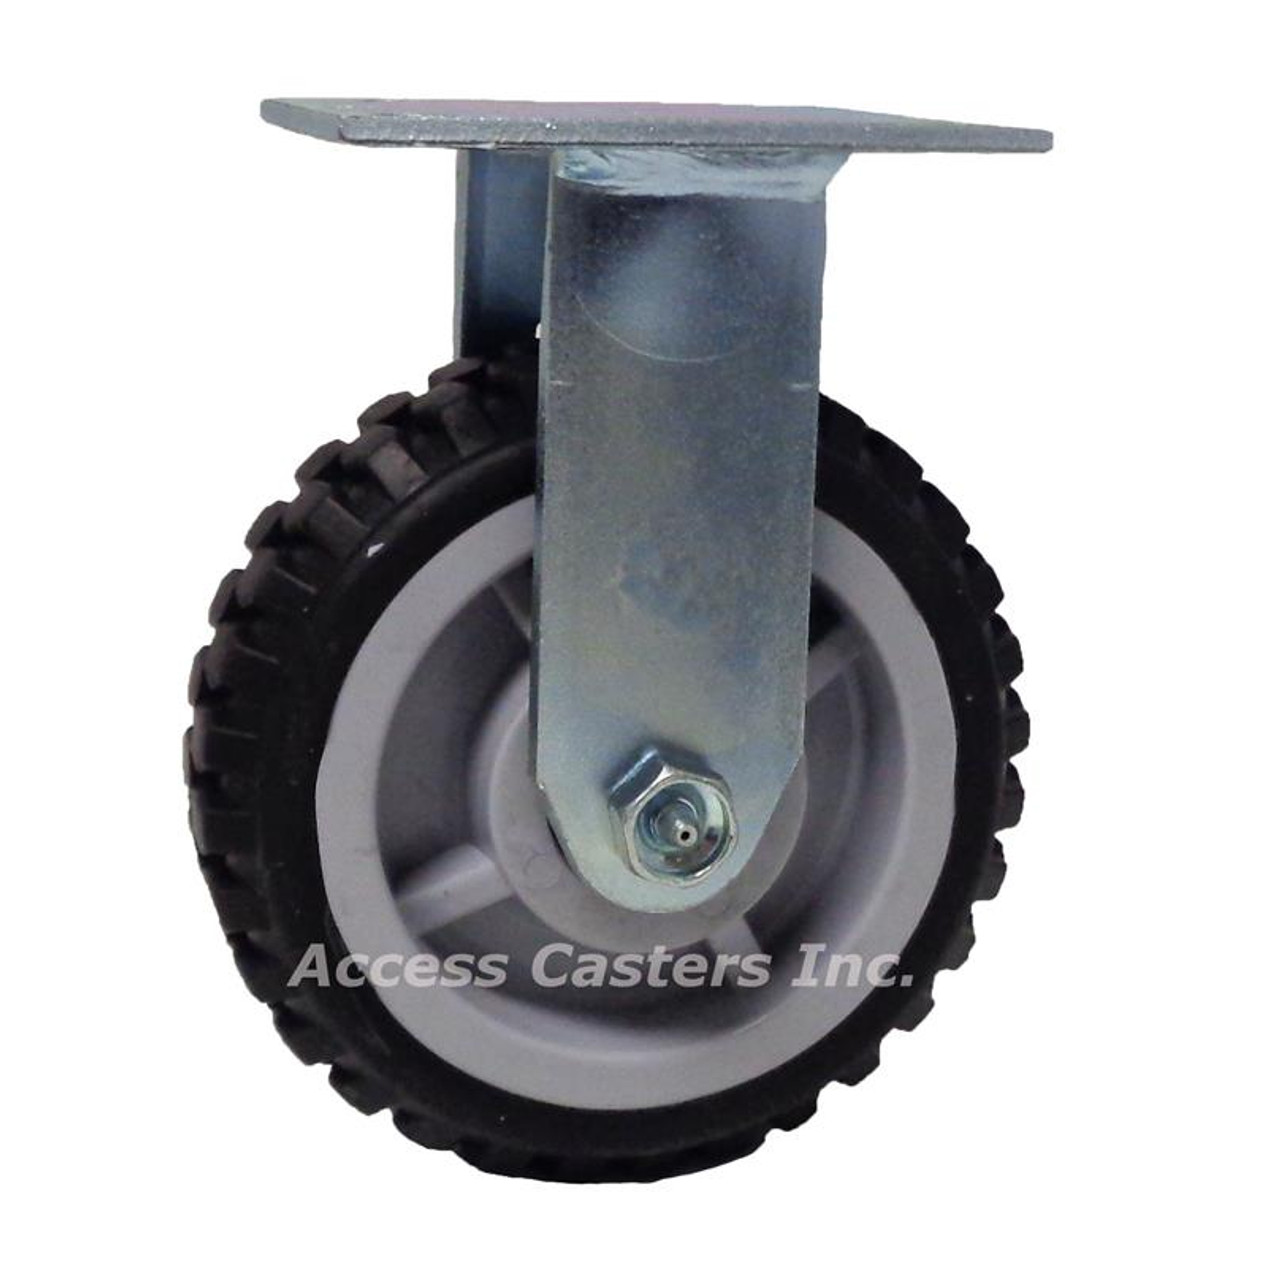 5DLSR 5" Rigid caster with semi-pneumatic style wheel